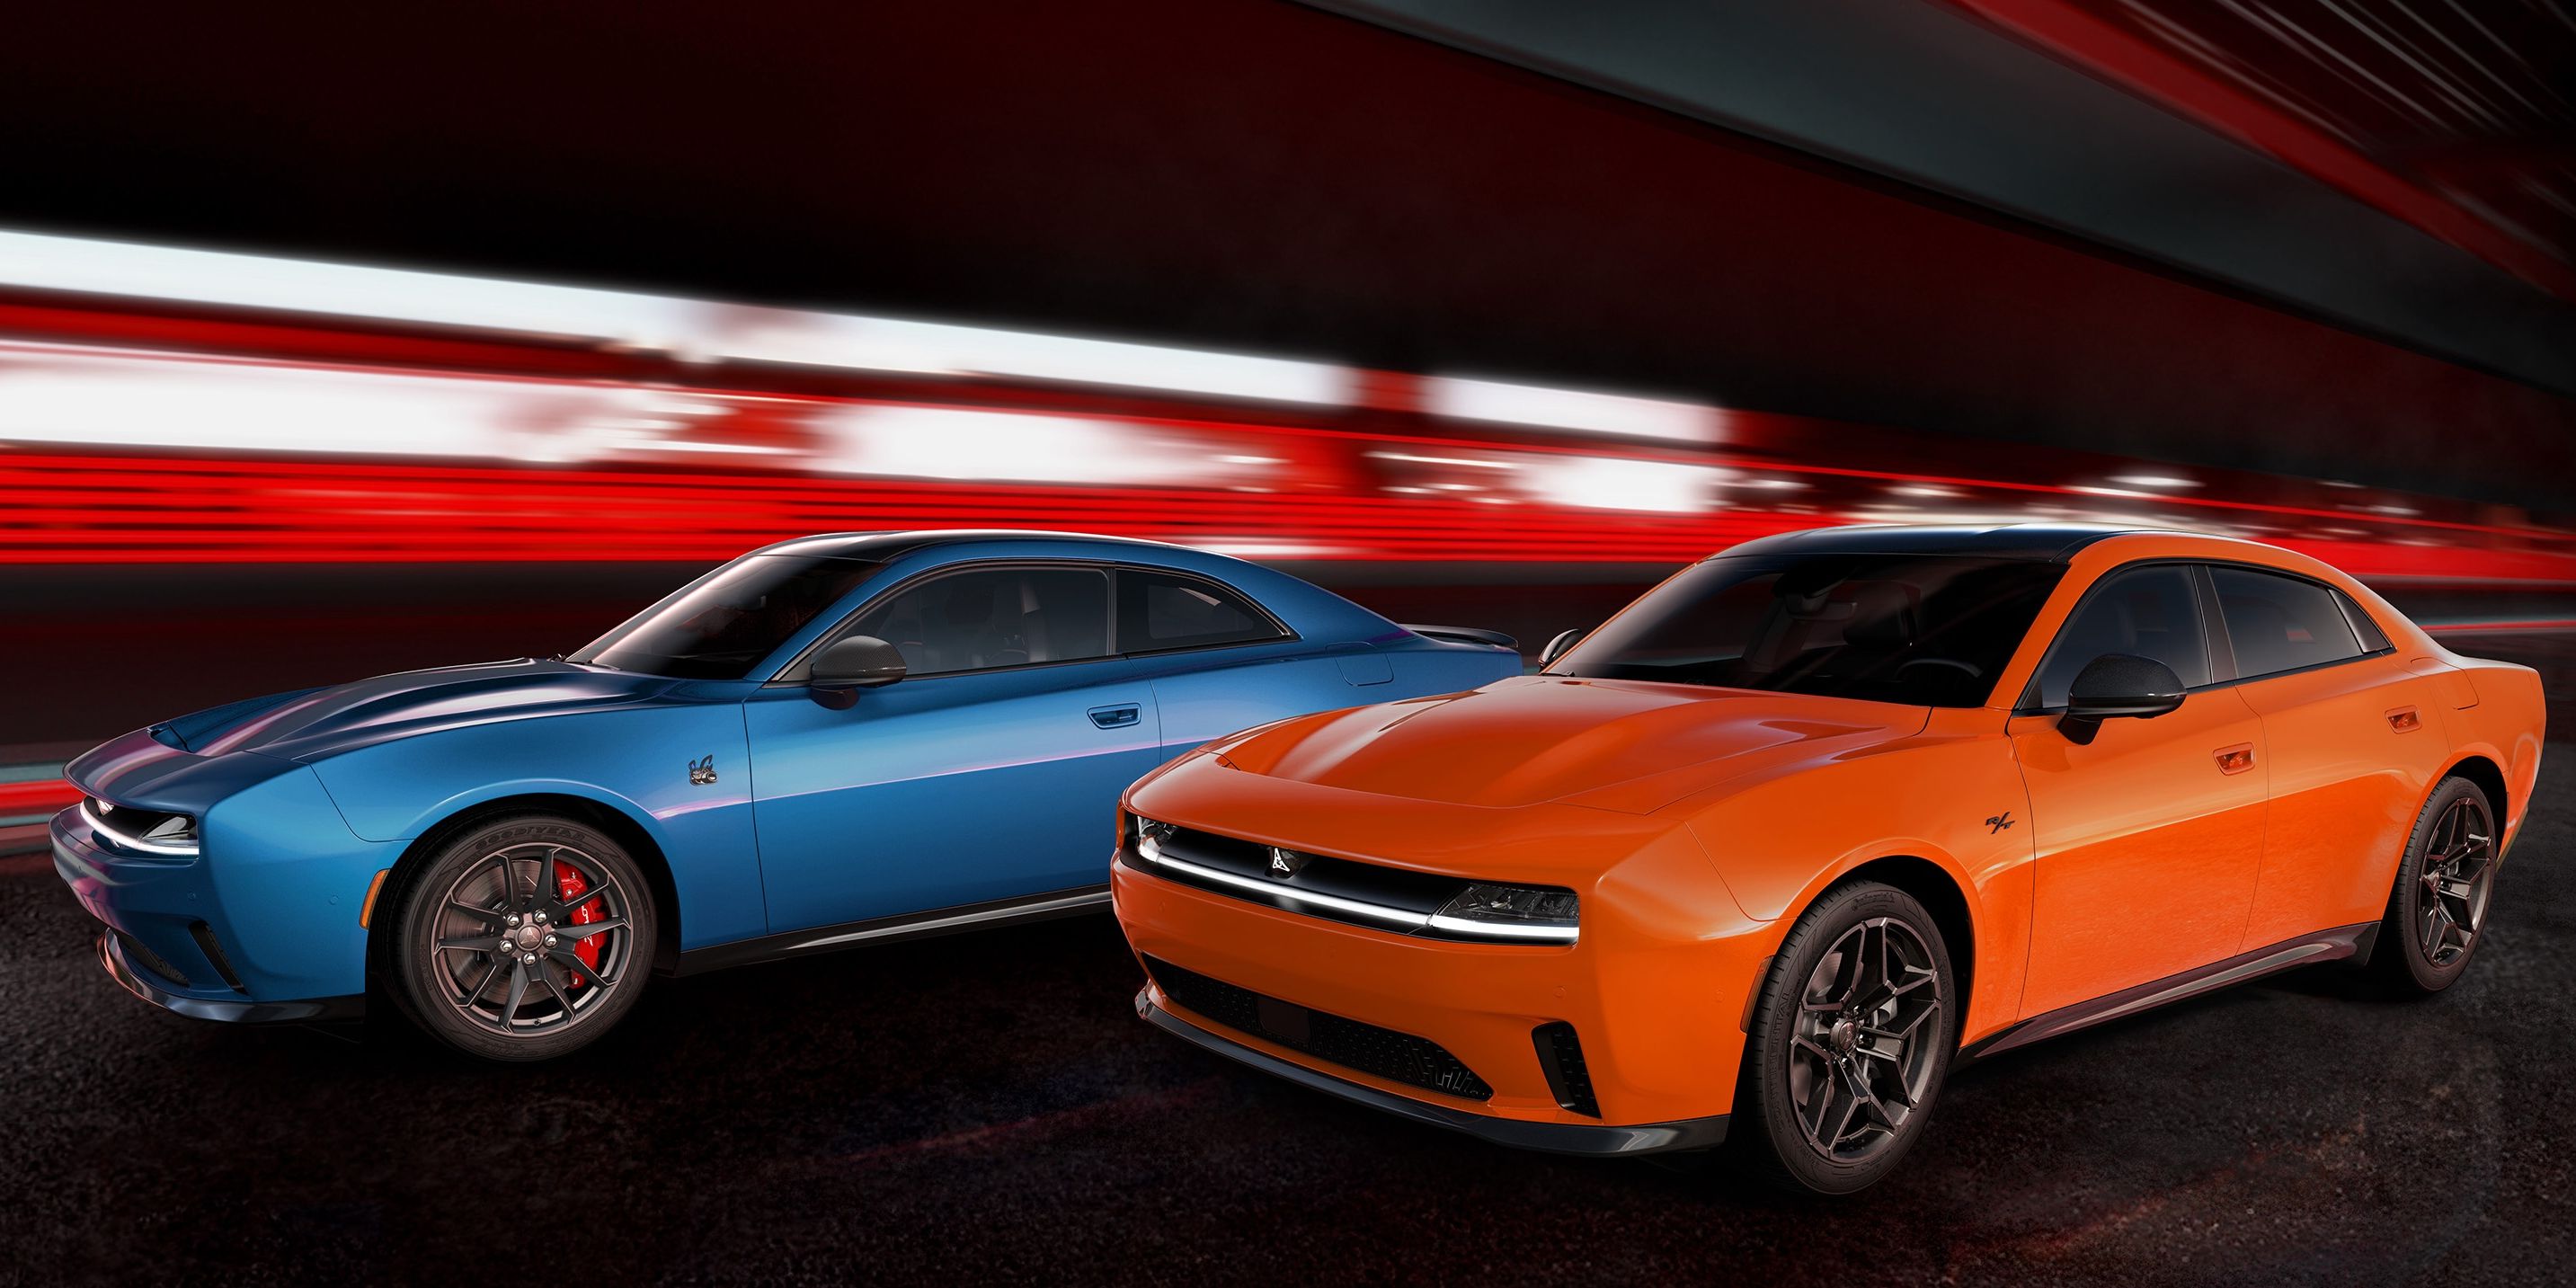 Is the Electric Dodge Charger a Muscle Car?